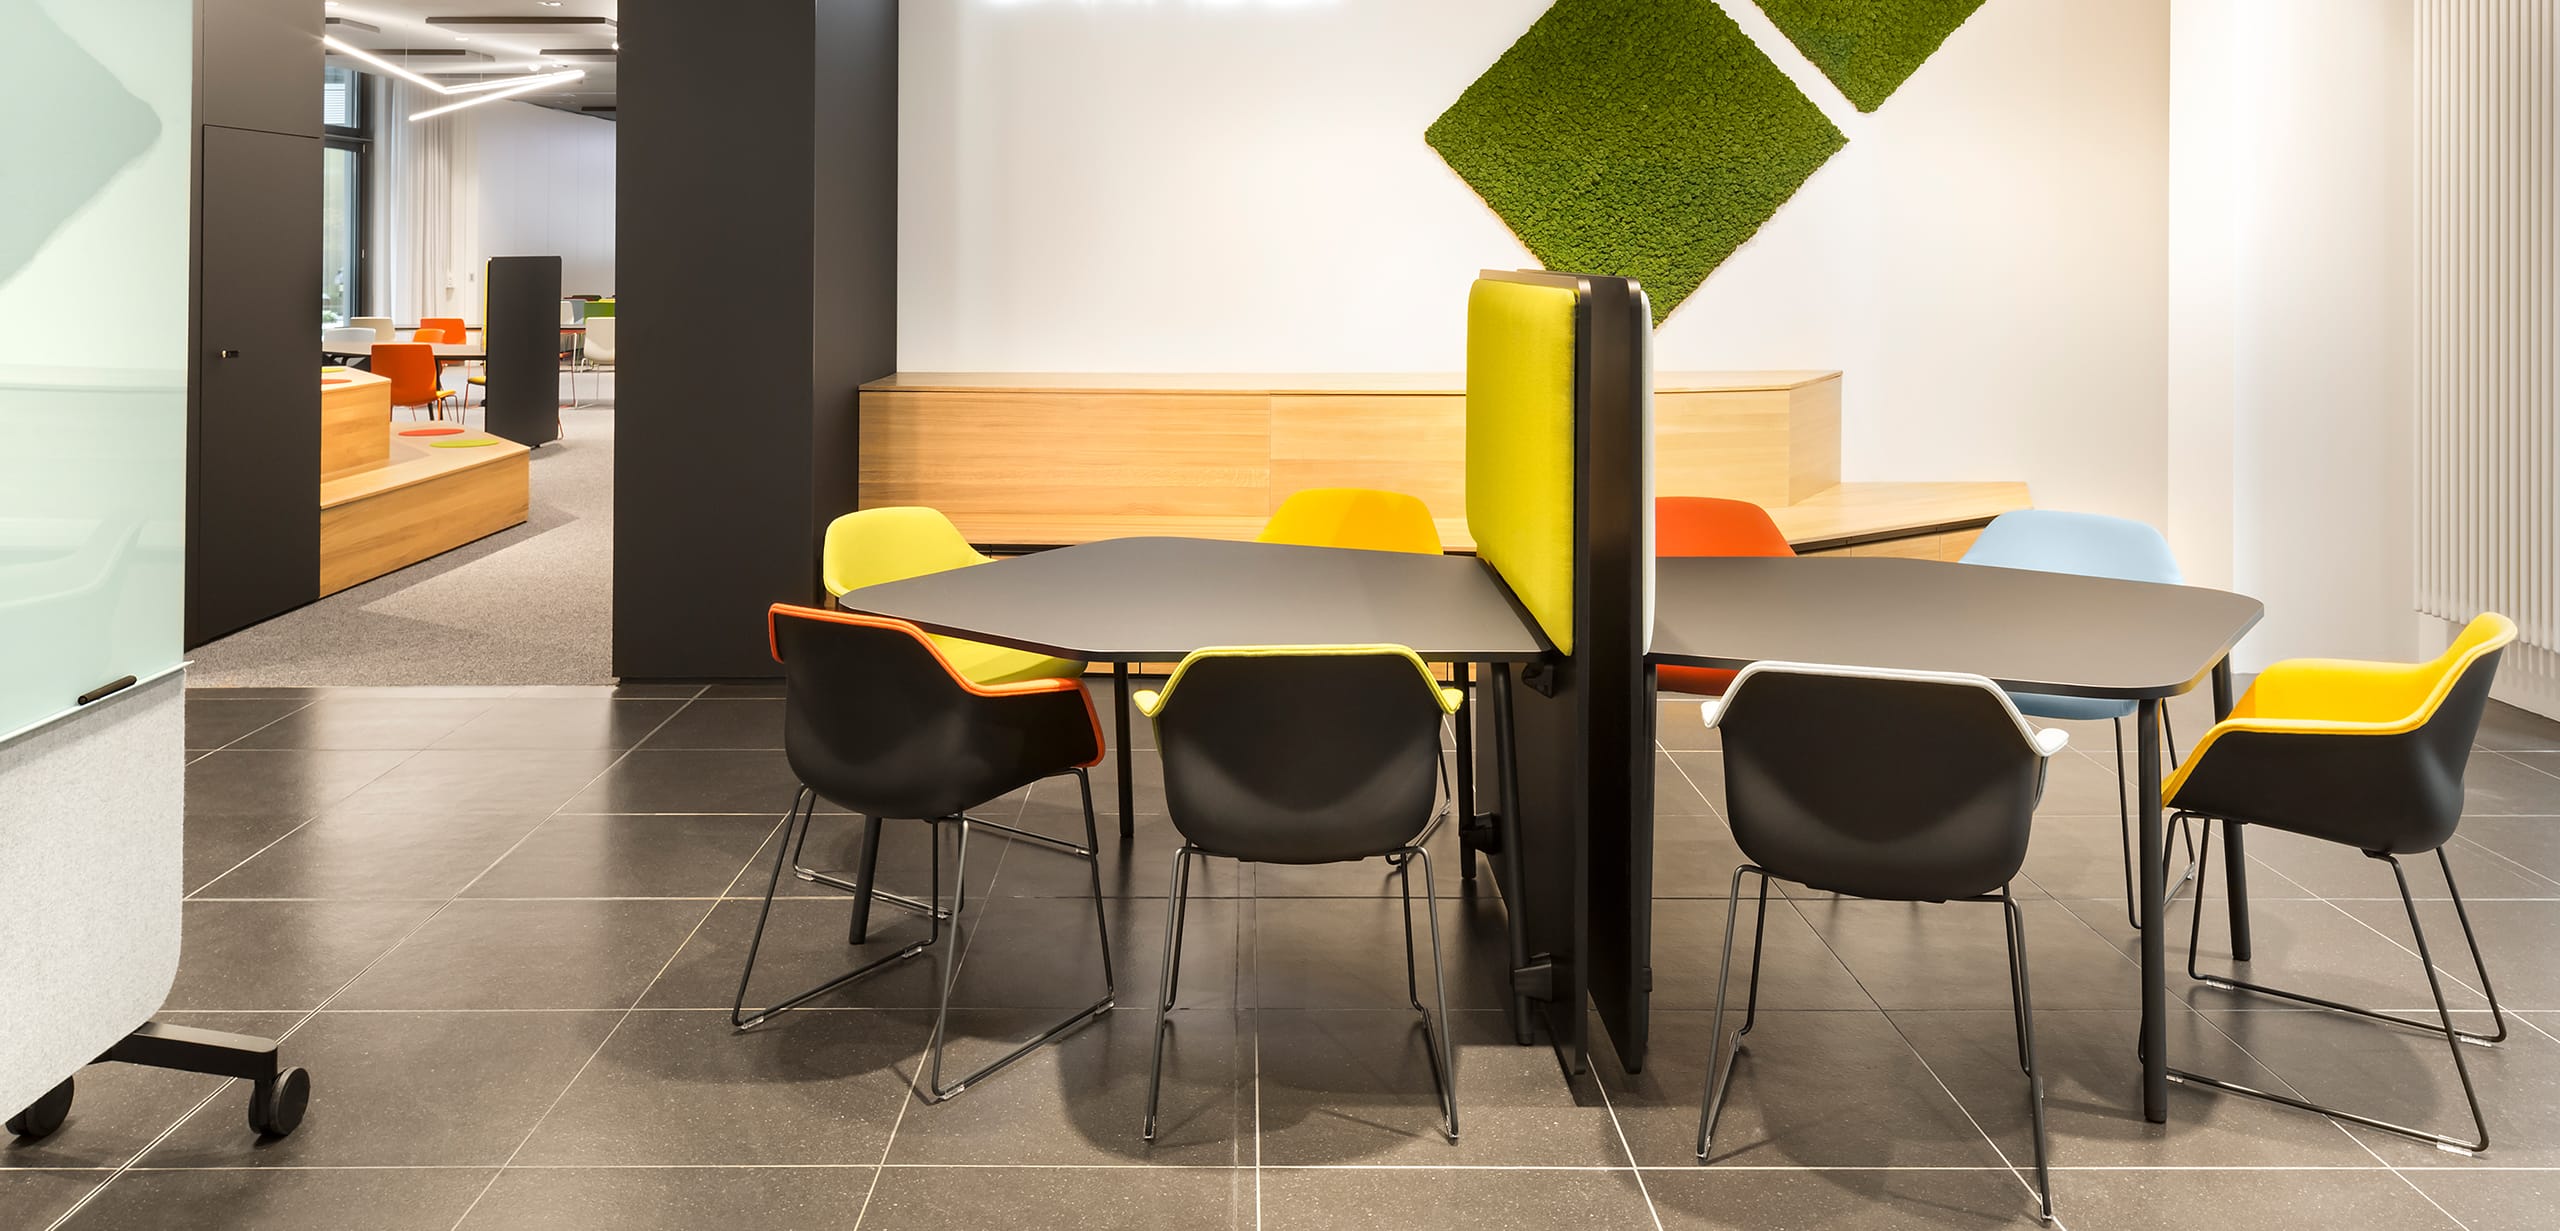 A meeting room with colourful office desk chairs and office tables and office screen dividers.